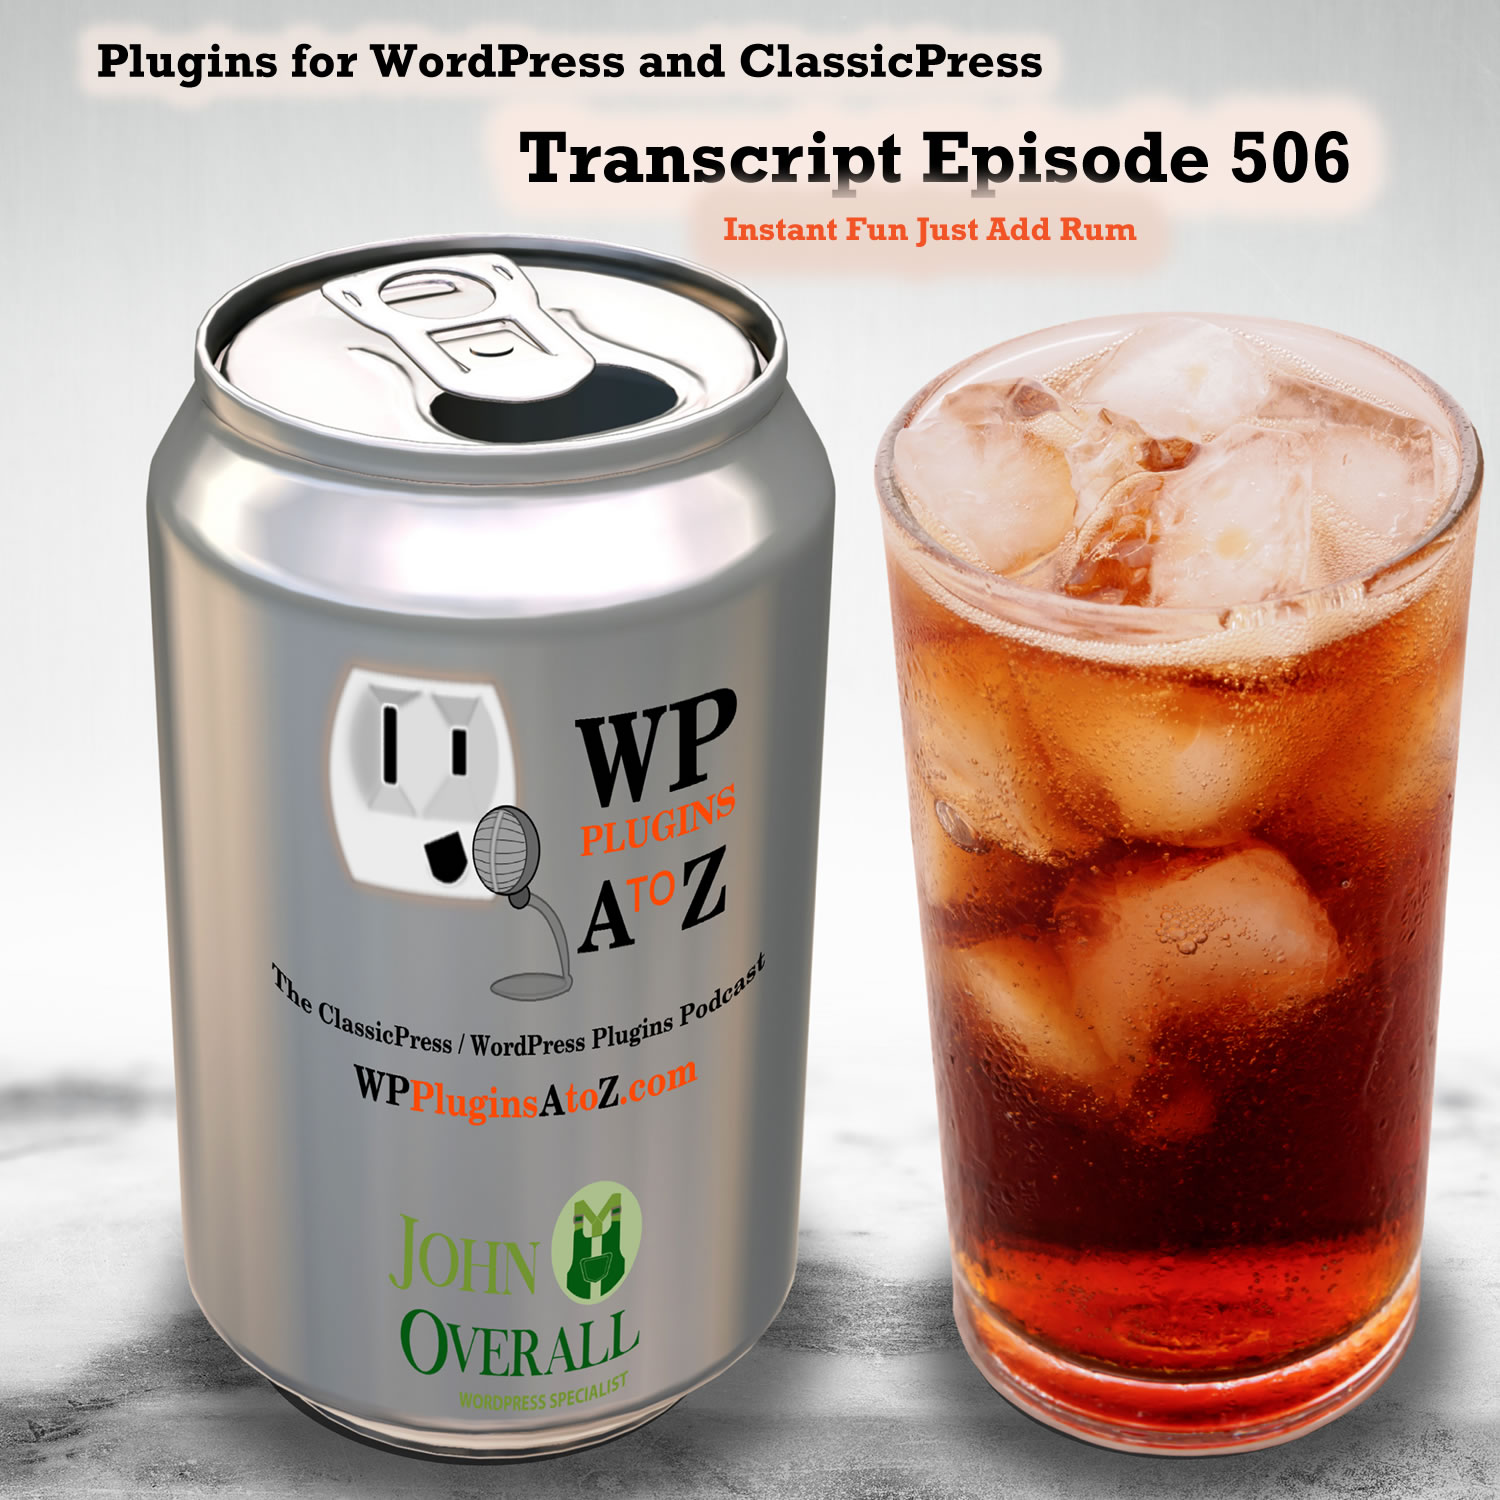 Instant Fun Just Add Rum It's Episode 506 - We have plugins for Cooking without Gas, Multiple personalities, Your Own Words, Getting Paid, Sliding Along, Blocking Ads...., and ClassicPress Options. It's all coming up on WordPress Plugins A-Z!